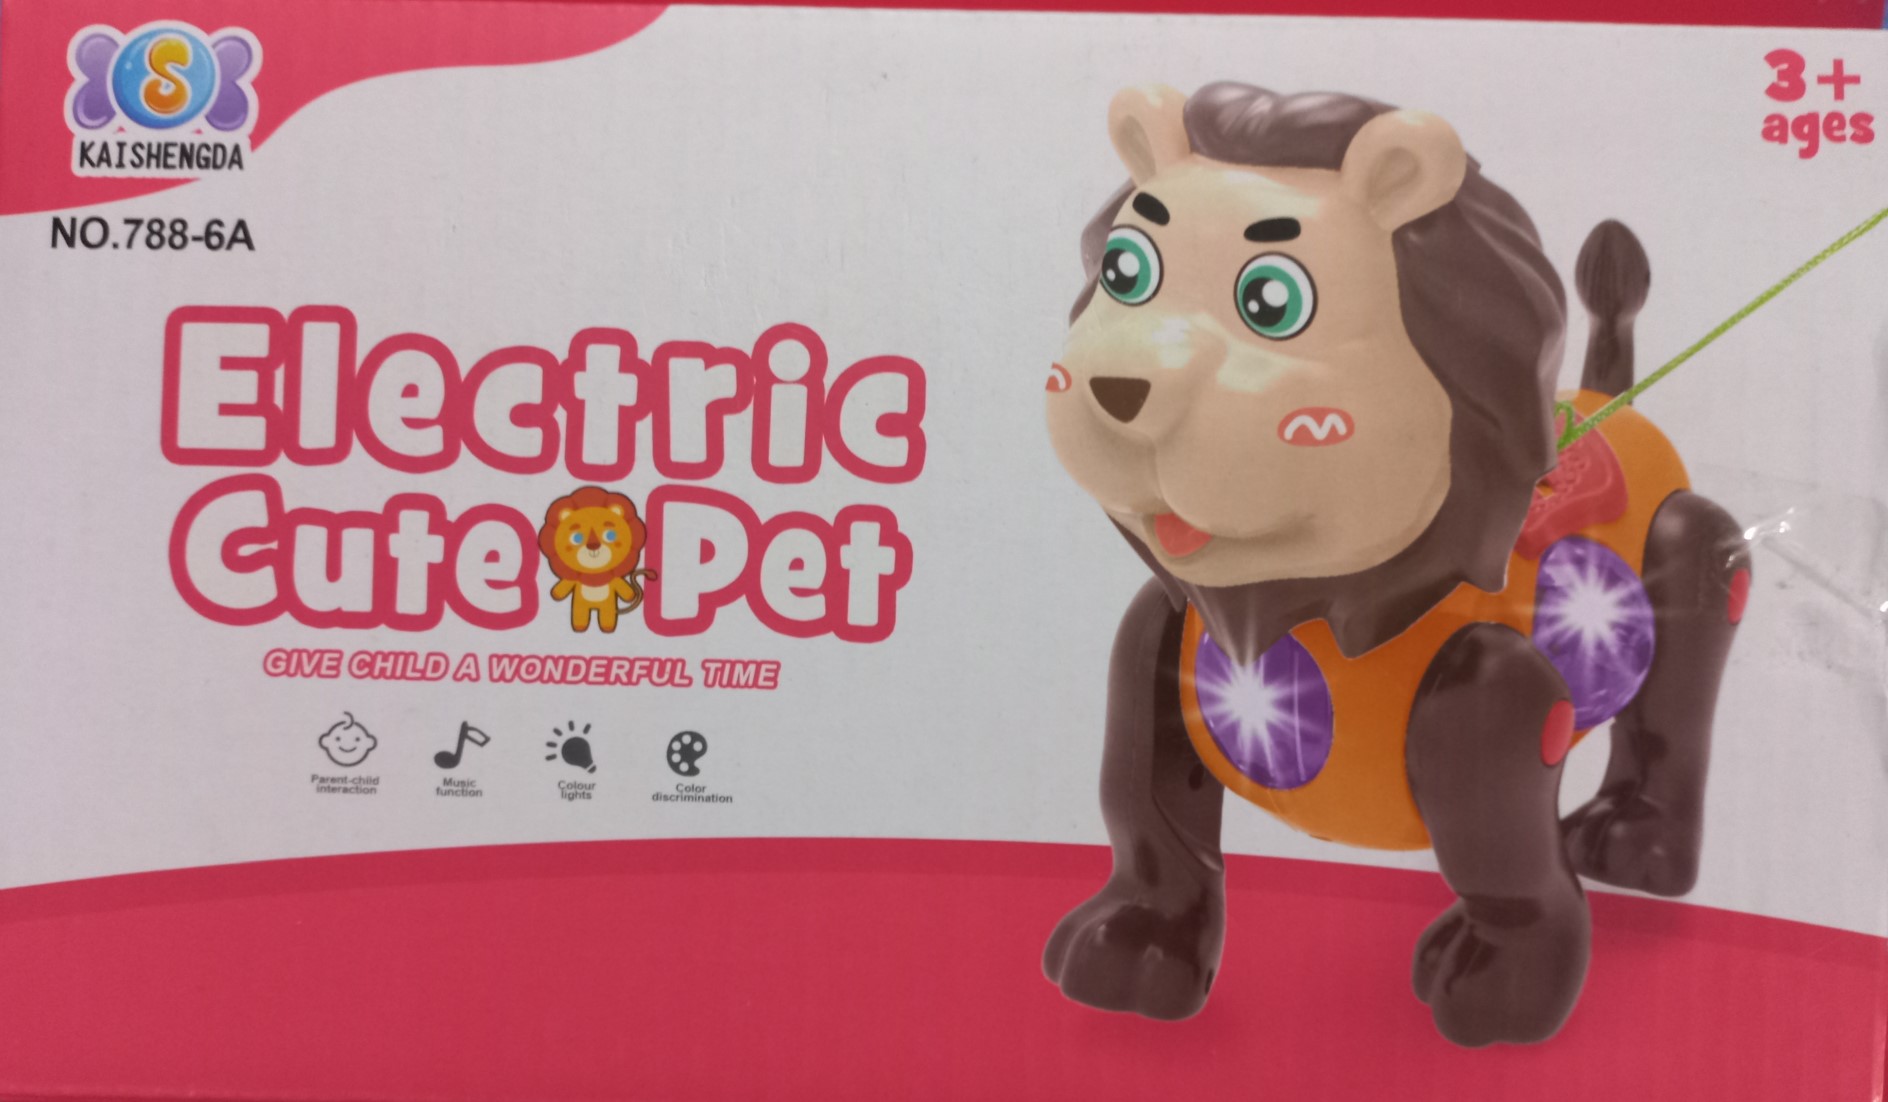 Electric Cute Pet for Age 3+